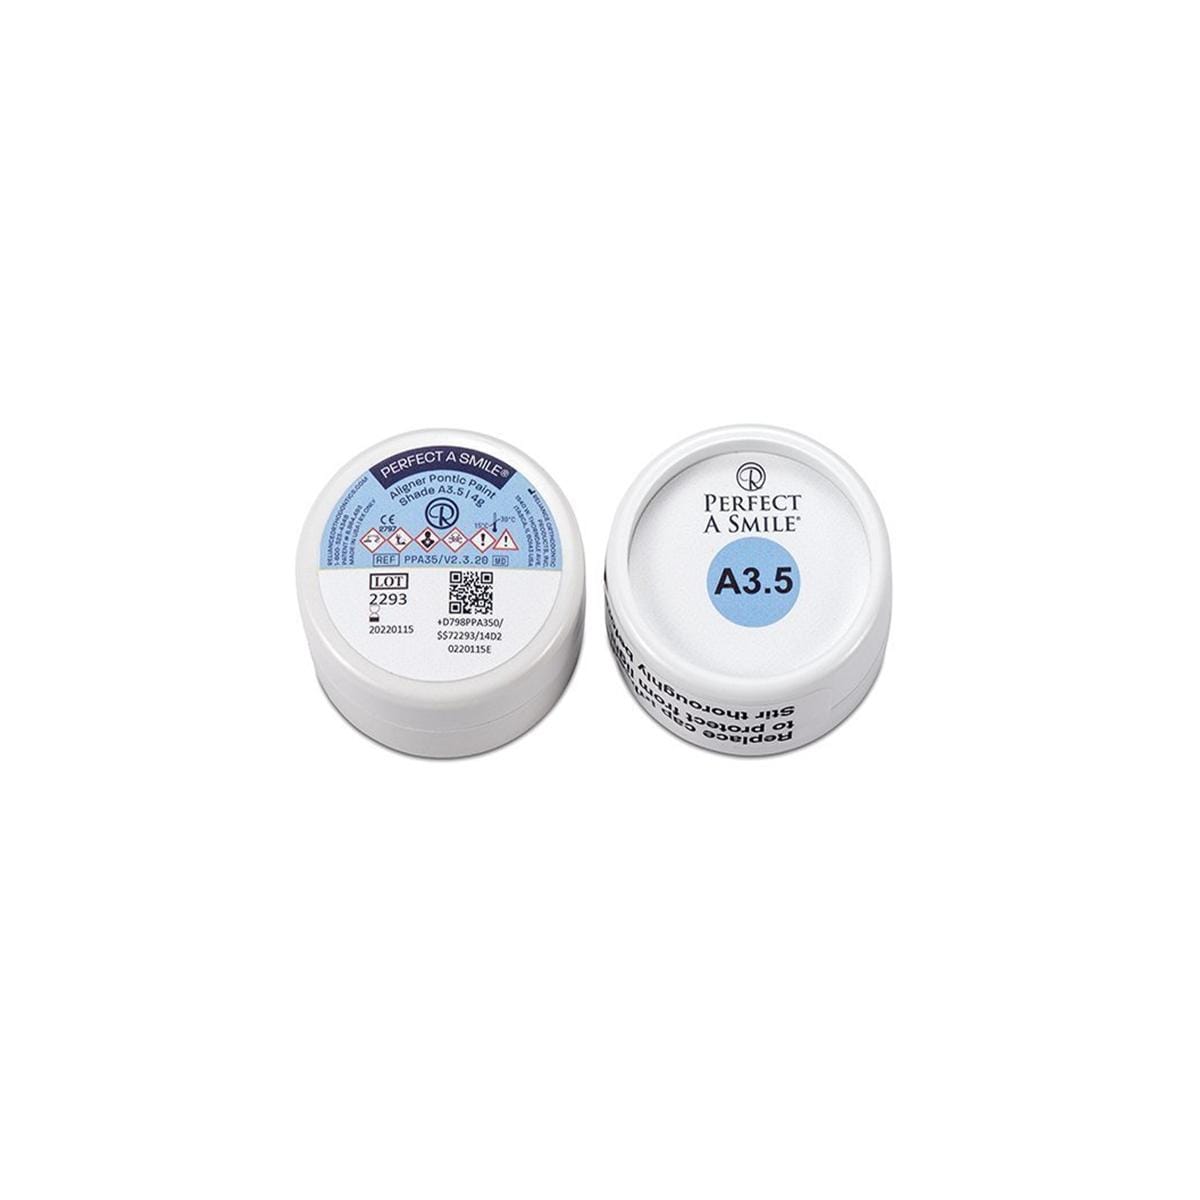 Perfect A Smile Pontic Paint Shade - A3,5, potje 4 g